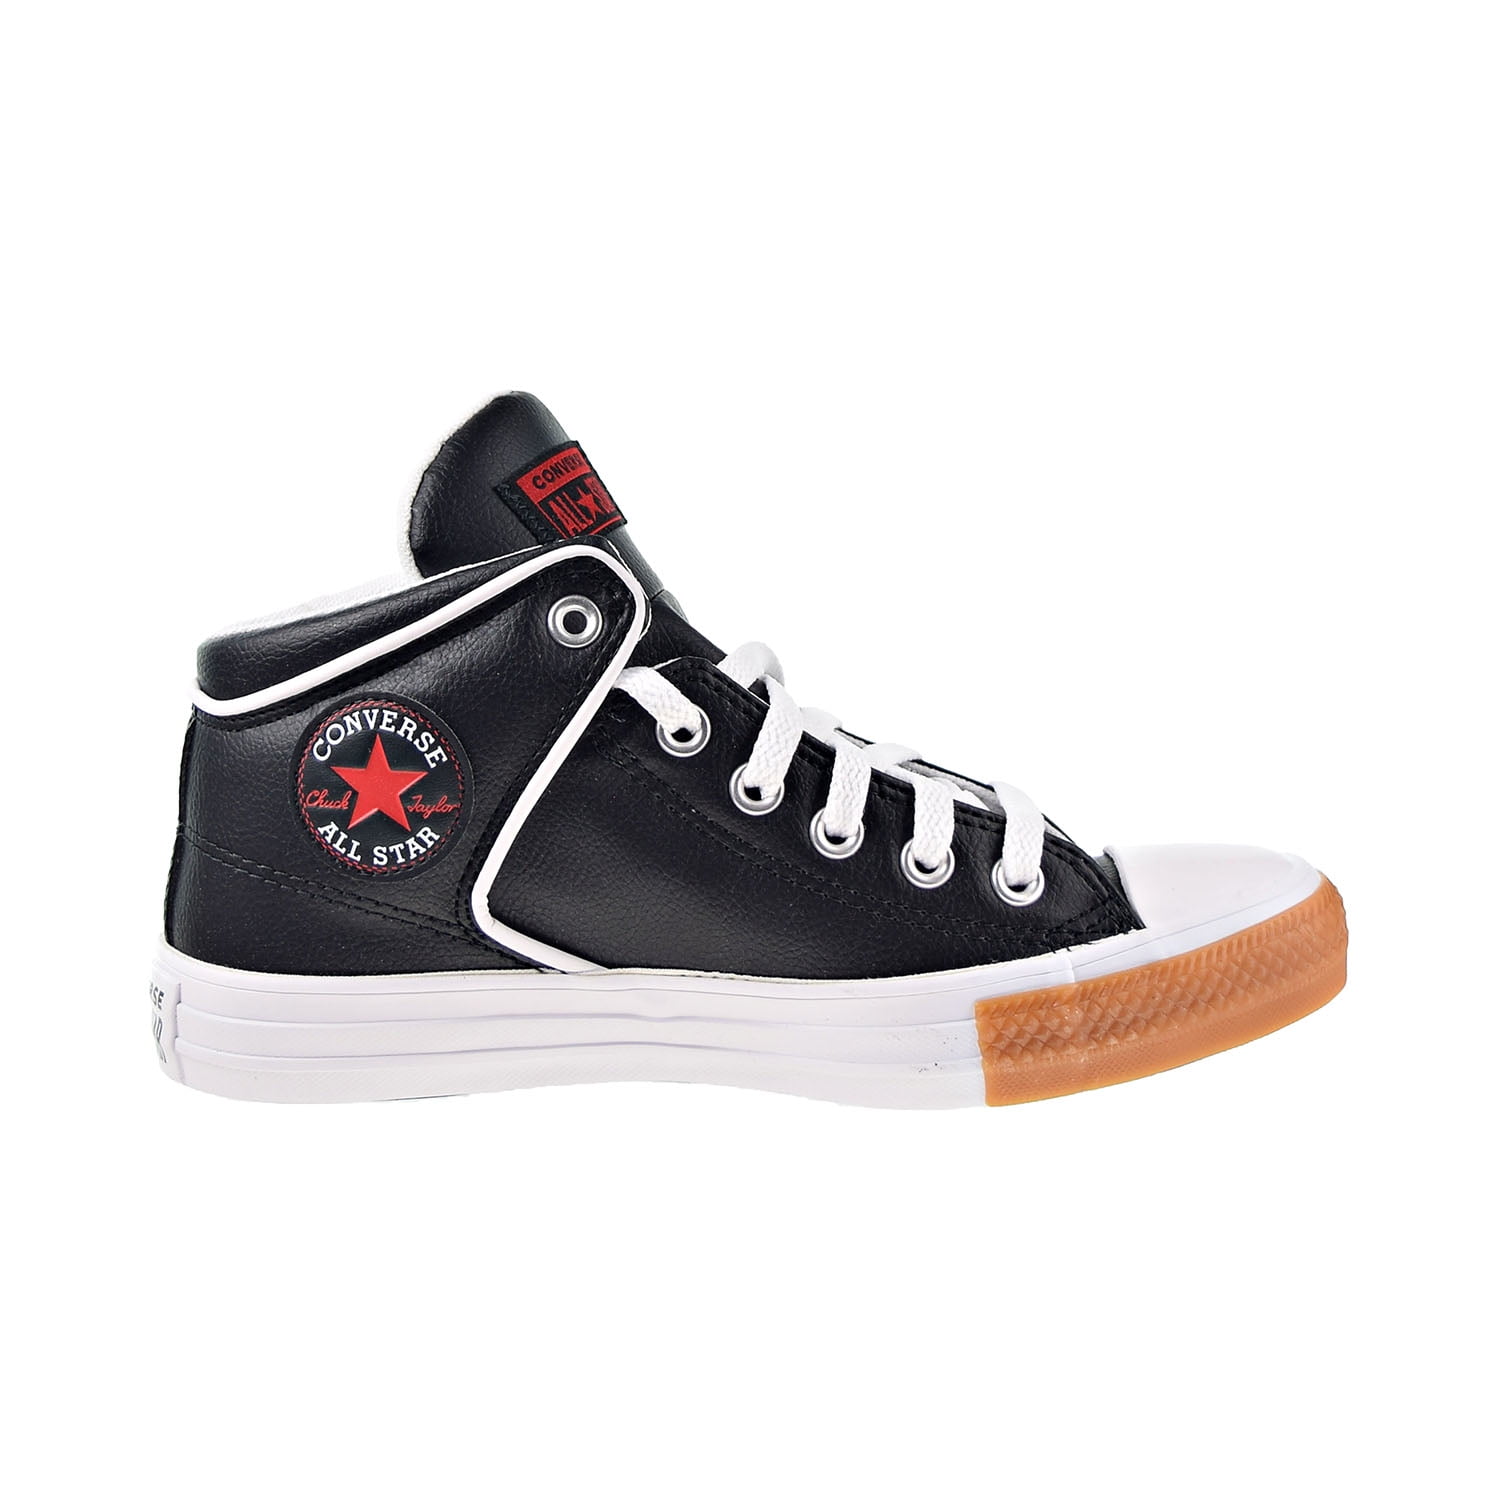 Men's Converse Chuck Taylor All Star High Street Leather Sneakers